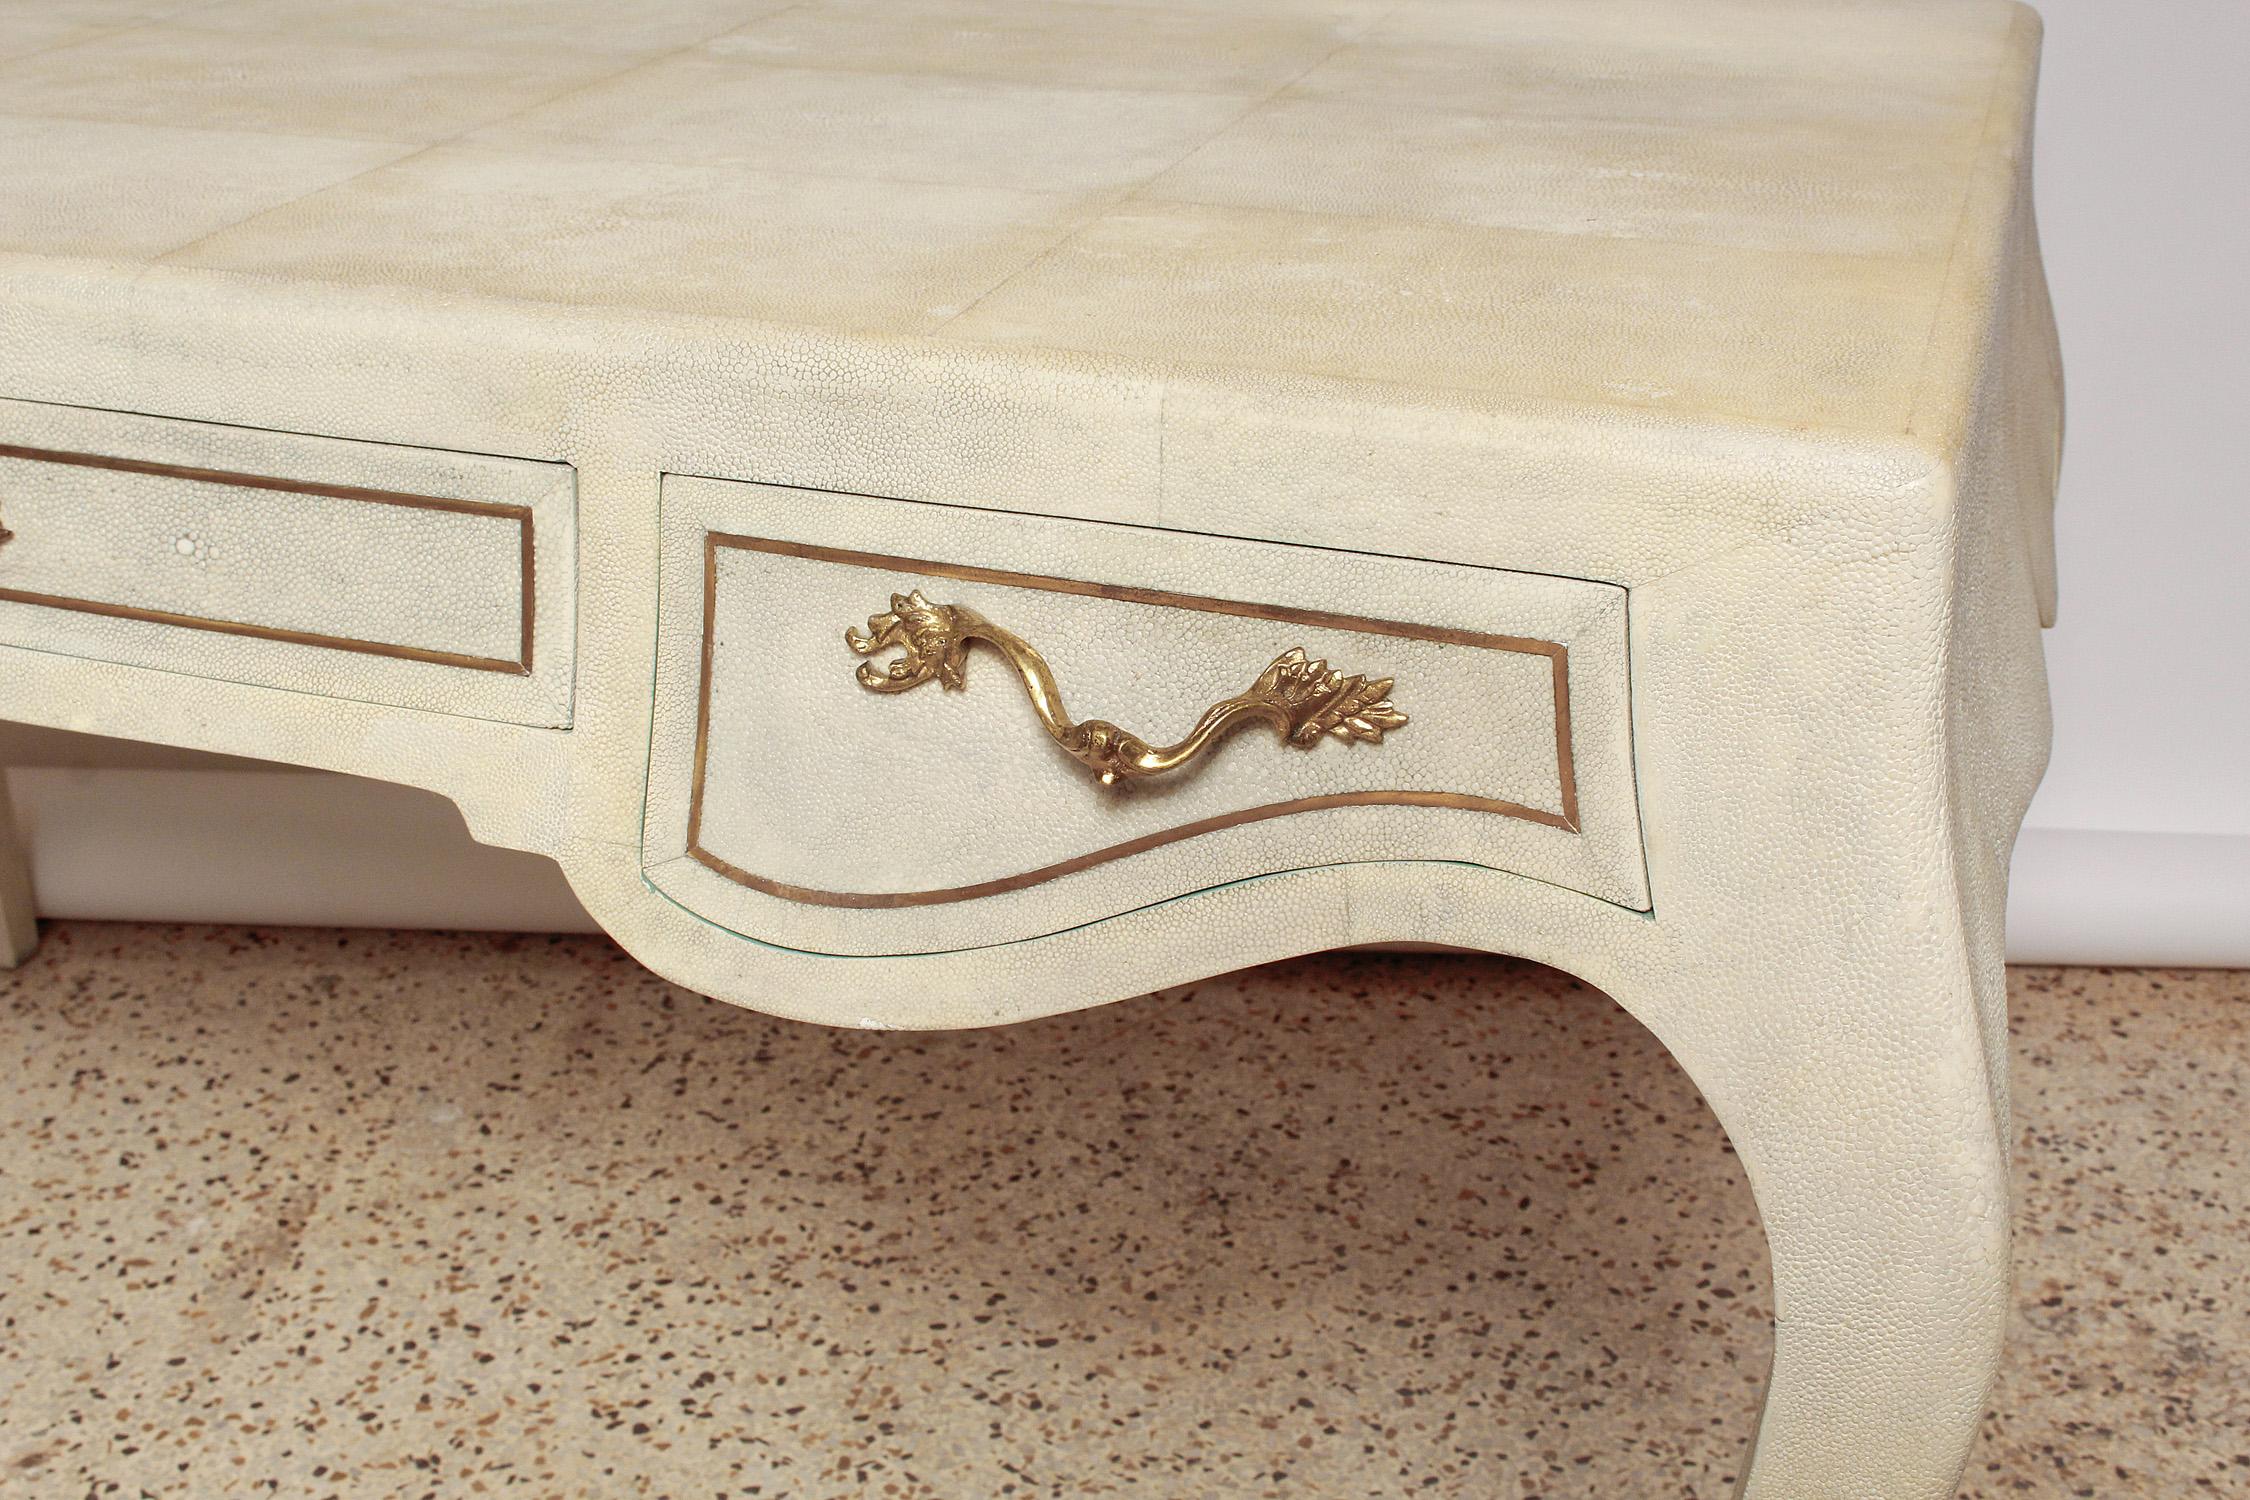 Gorgeous Louis XV style desk by Maitland Smith in cream and grey natural shagreen with delicate cabriole legs and solid brass hardware and inlays, circa 1985. 
Be a home office Boss!